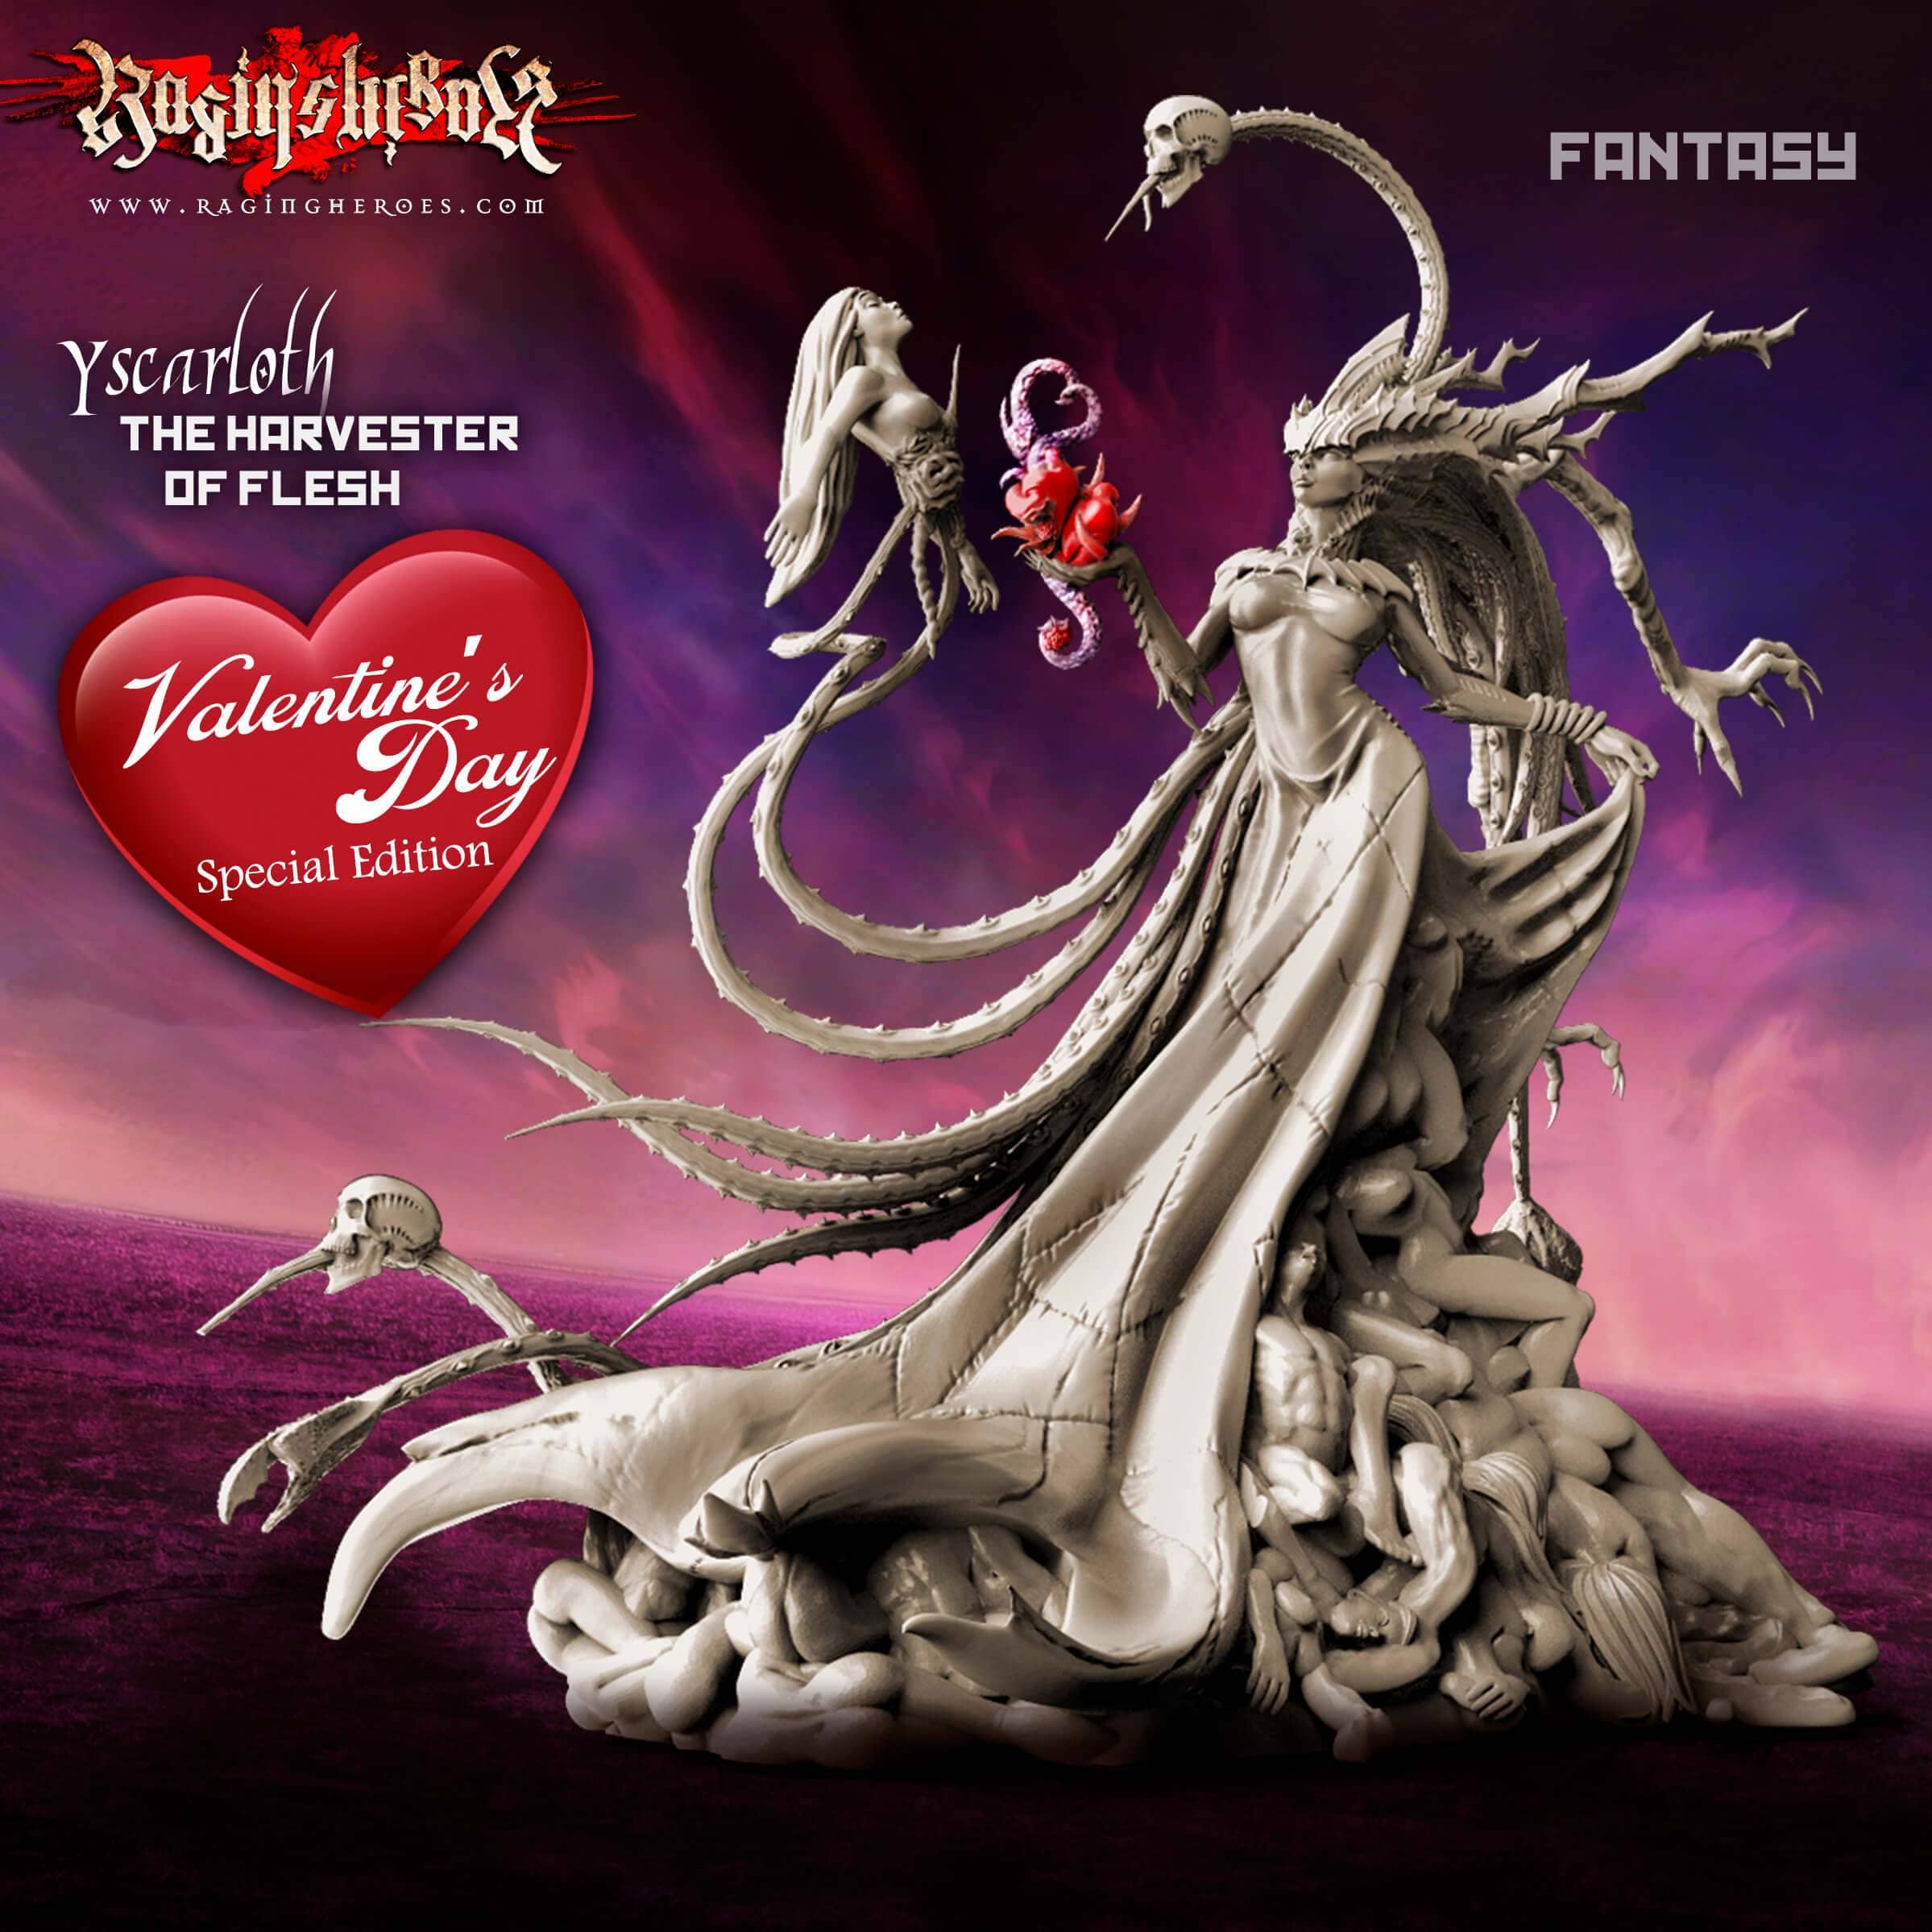 Yscarloth, The Harvester of Flesh, VALENTINE'S DAY Special Edition 